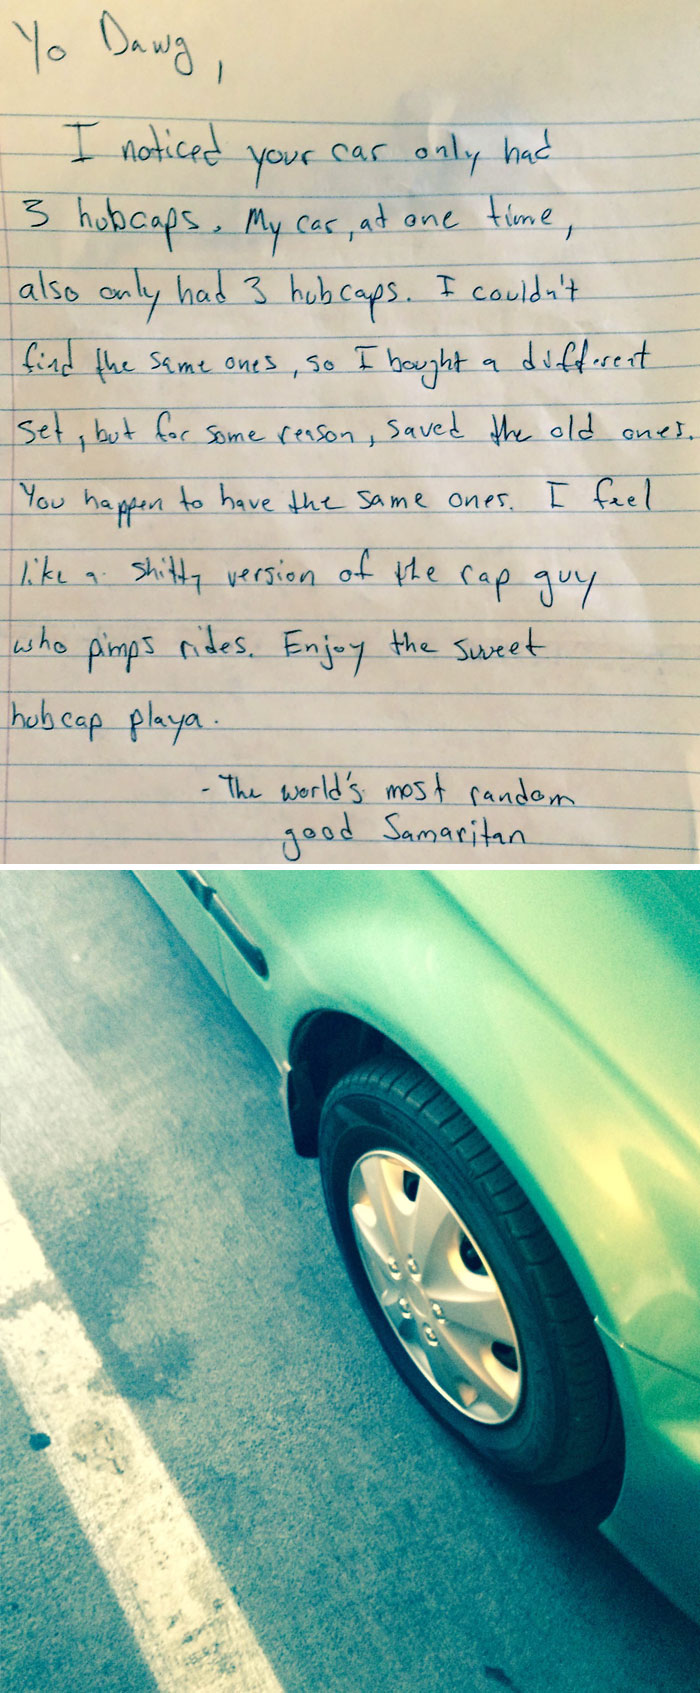 Found This Note On My Car After Work Yesterday. Lost My Hubcap When I Moved Across The Country. Thanks Kind Stranger